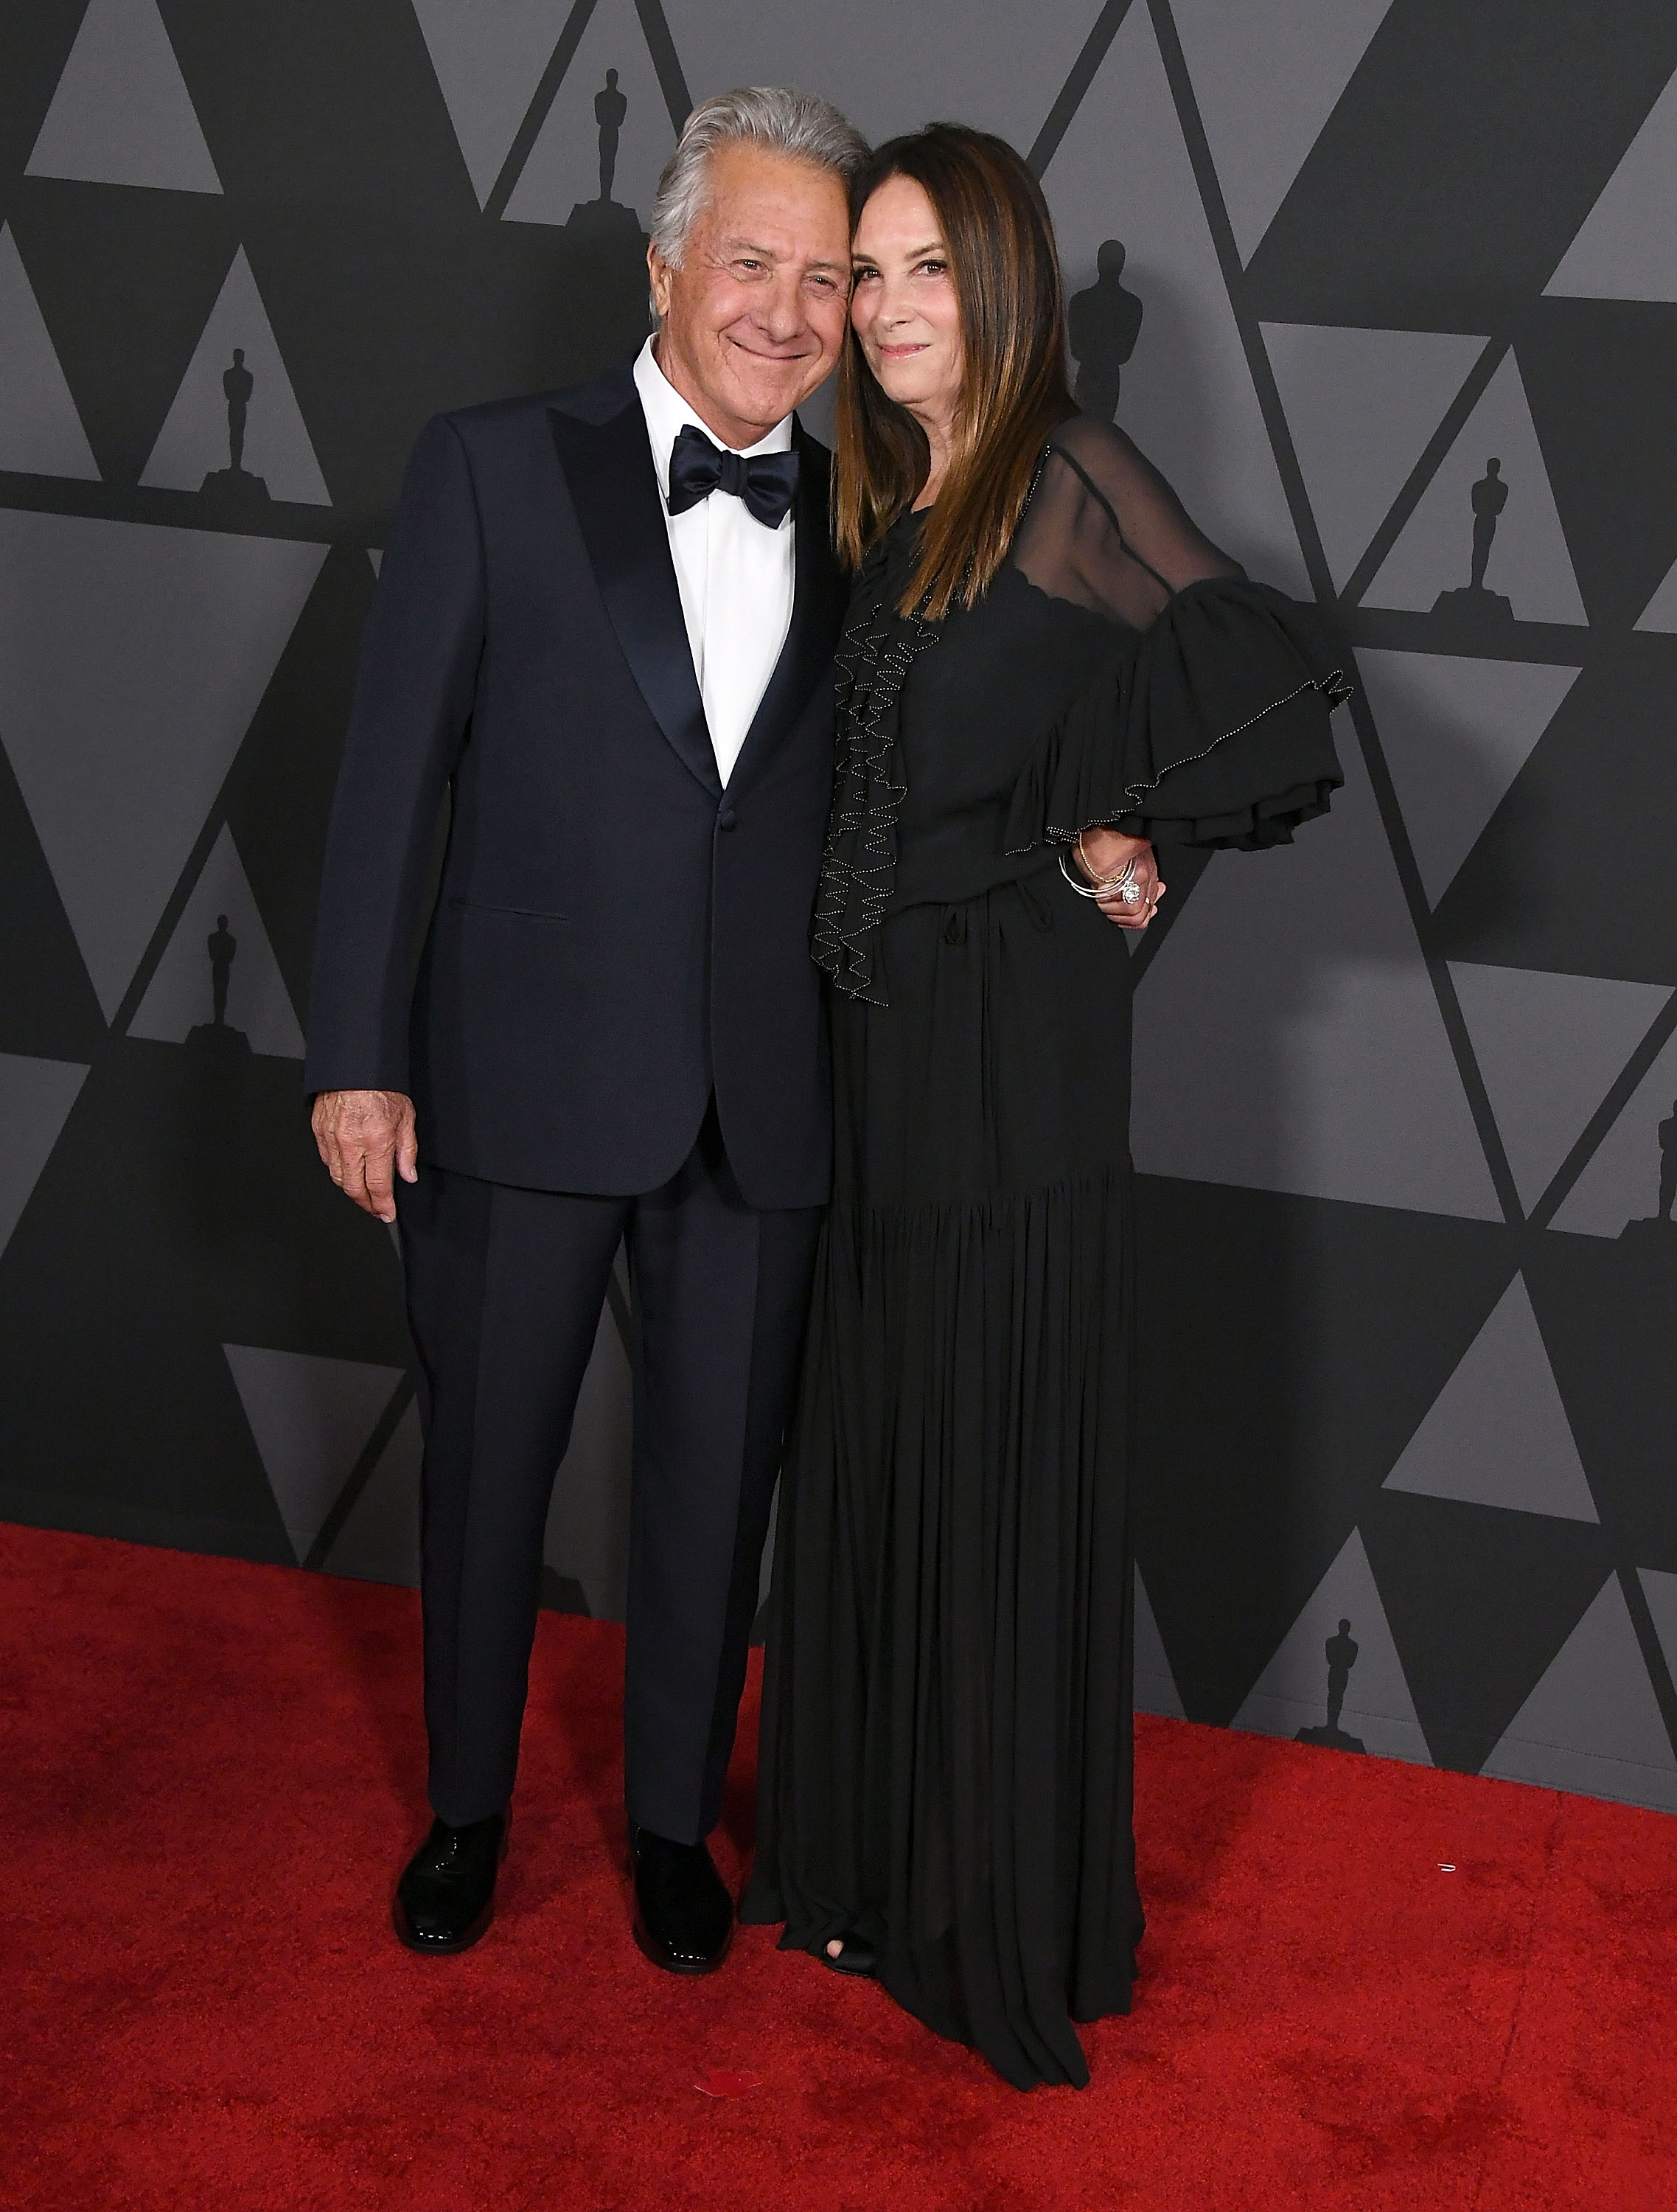  Dustin Hoffman, Lisa Hoffman arrives at the Academy Of Motion Picture Arts And Sciences' 9th Annual Governors Awards at The Ray Dolby Ballroom at Hollywood & Highland Center on November 11, 2017 in Hollywood, California. | Source: Getty Images 